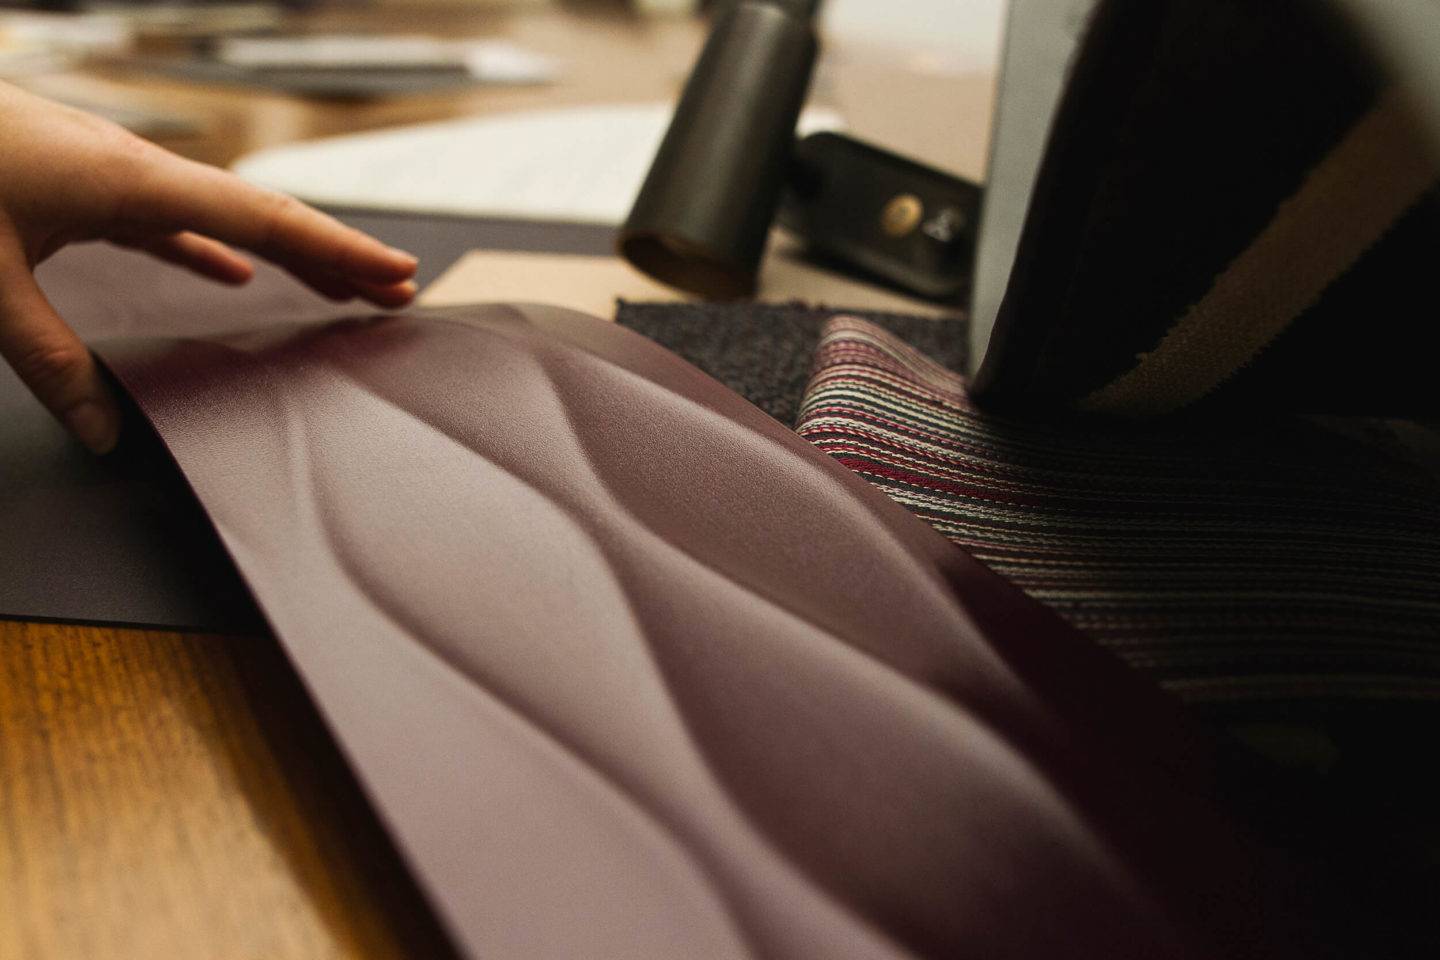 A designer choosing material finishes for Qatar Airways